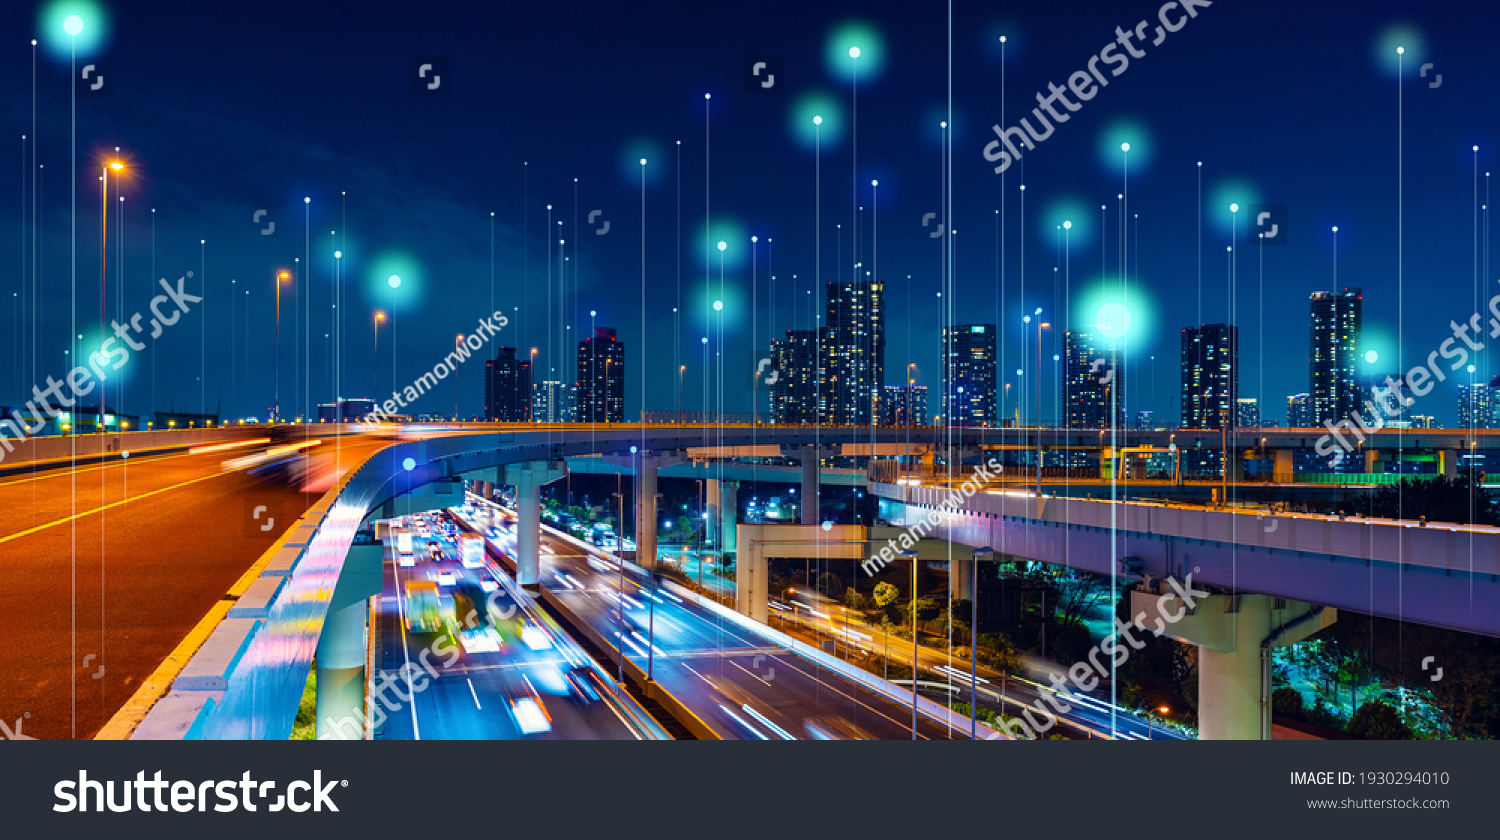 Modern cityscape and communication network concept. Telecommunication. IoT (Internet of Things). ICT (Information communication Technology). 5G. Smart city. Digital transformation. #1930294010